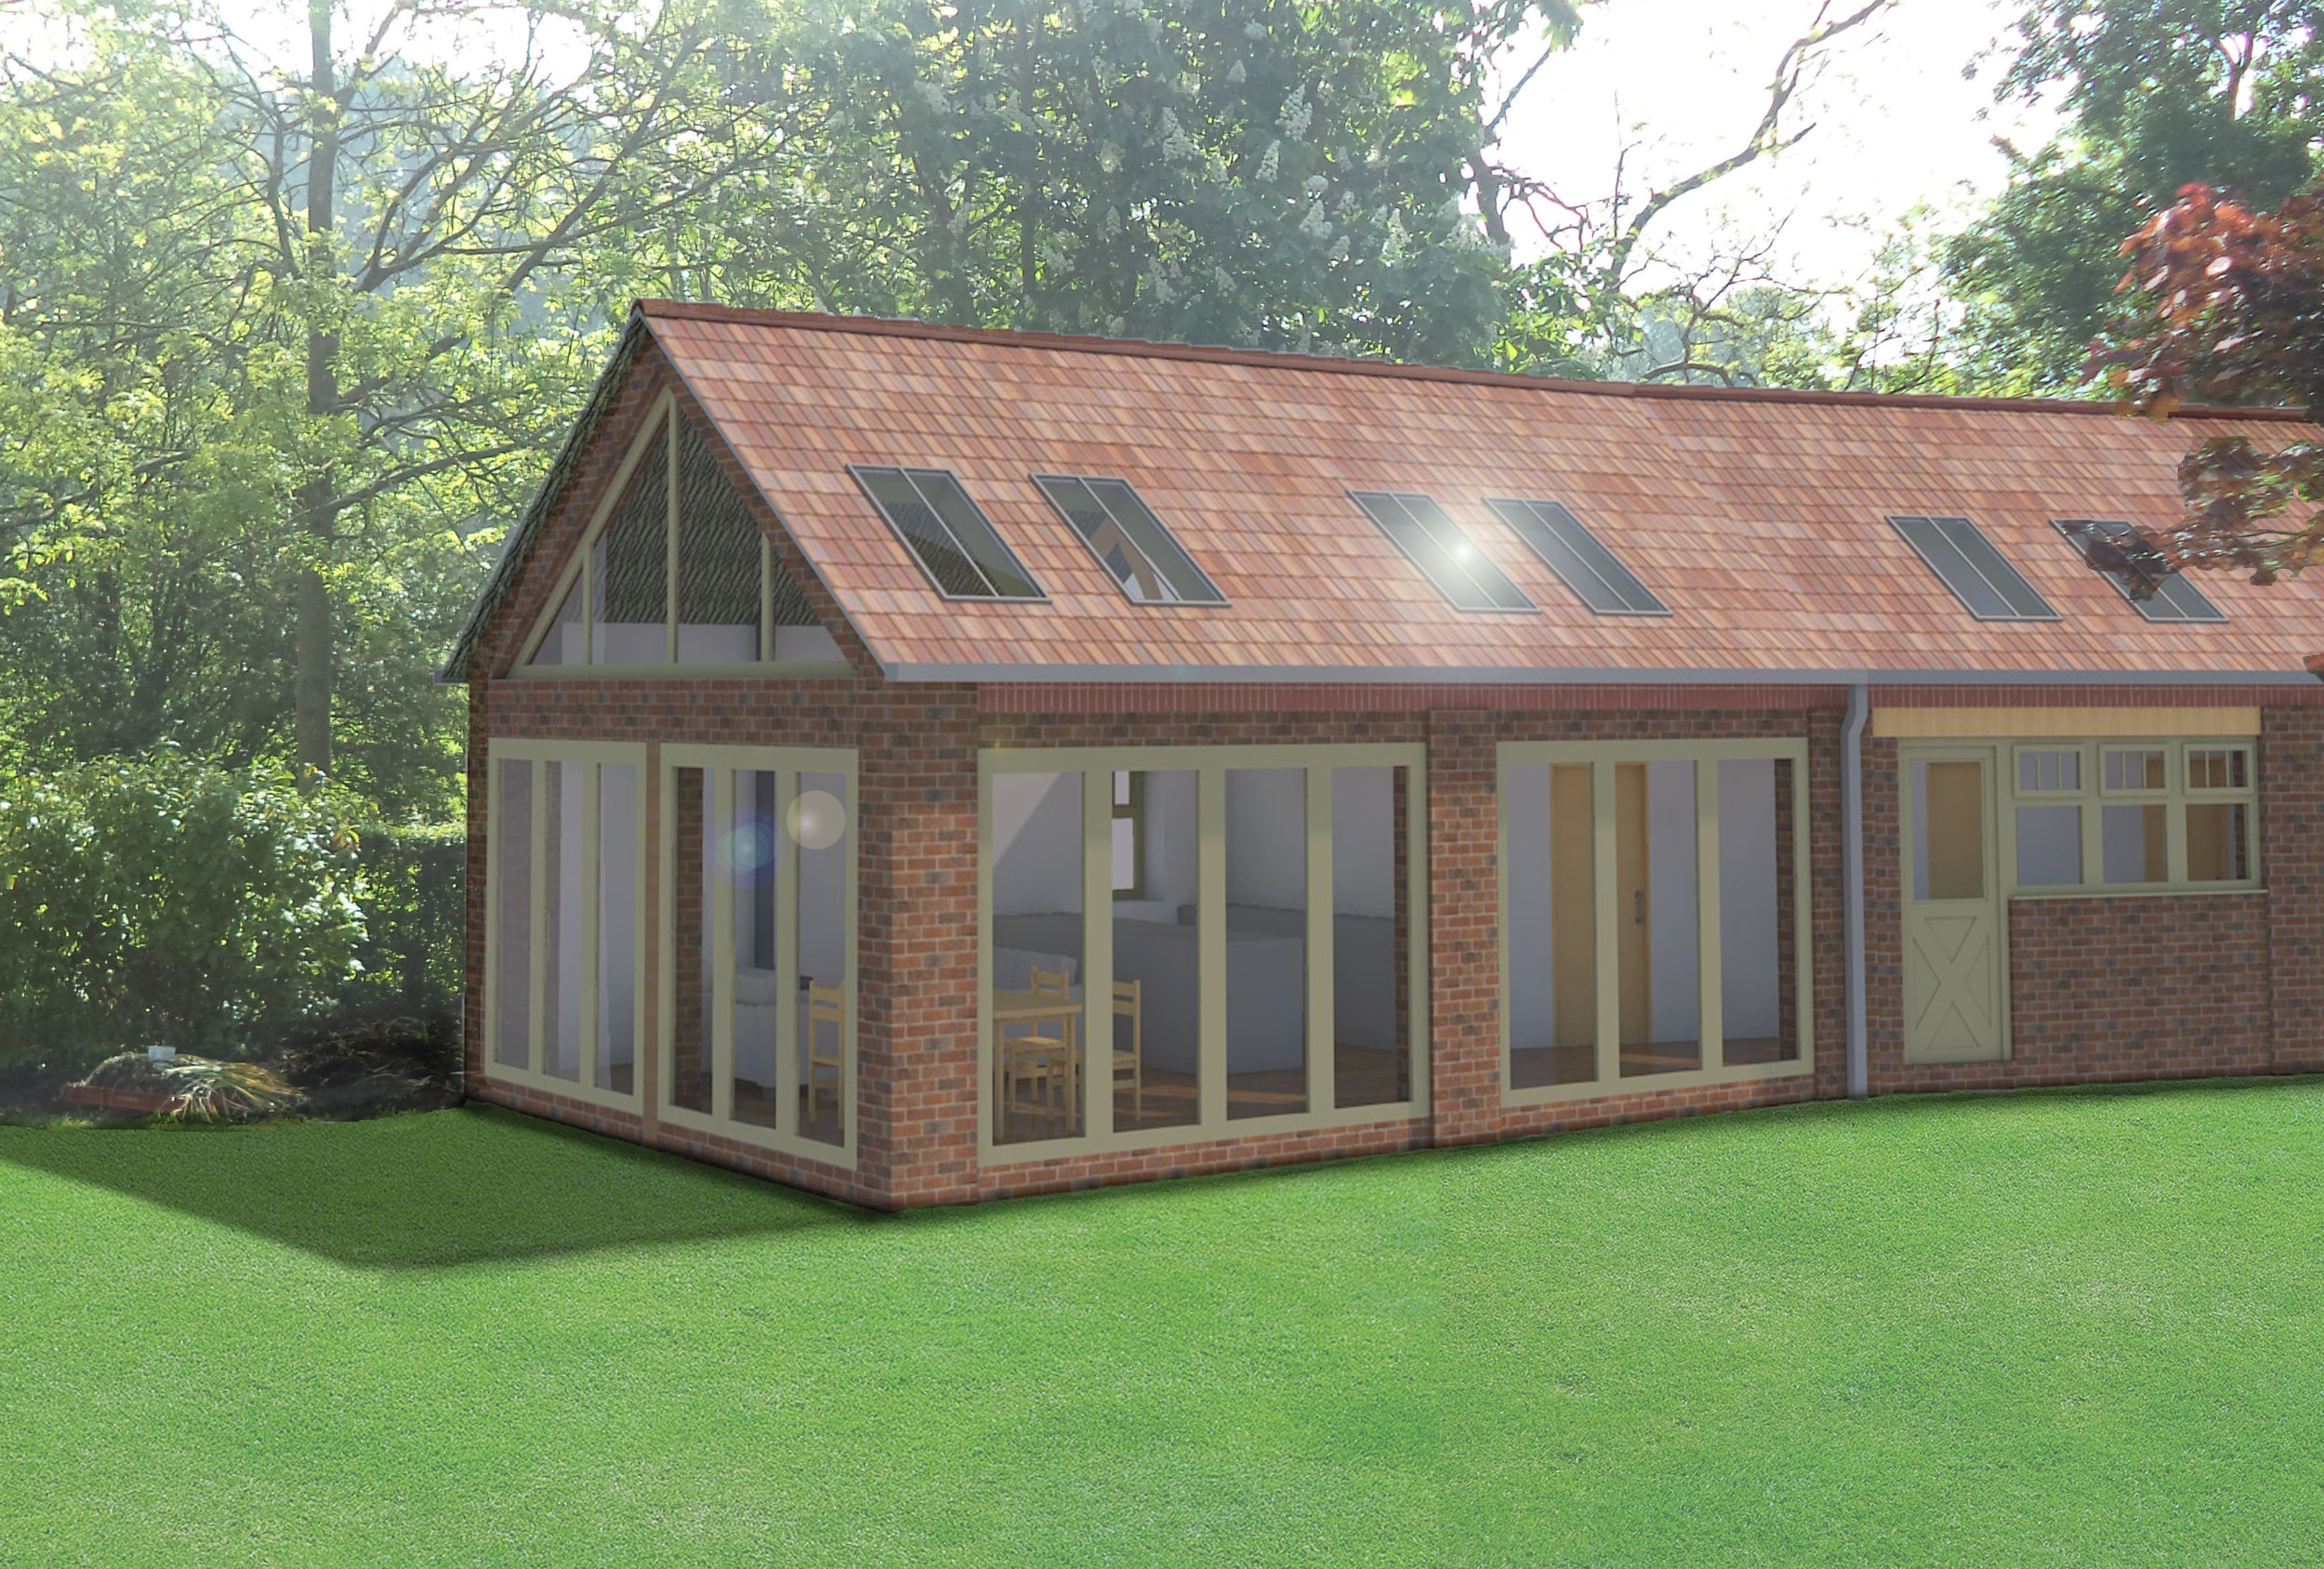 New Building Dwelling Approved in Open Countryside